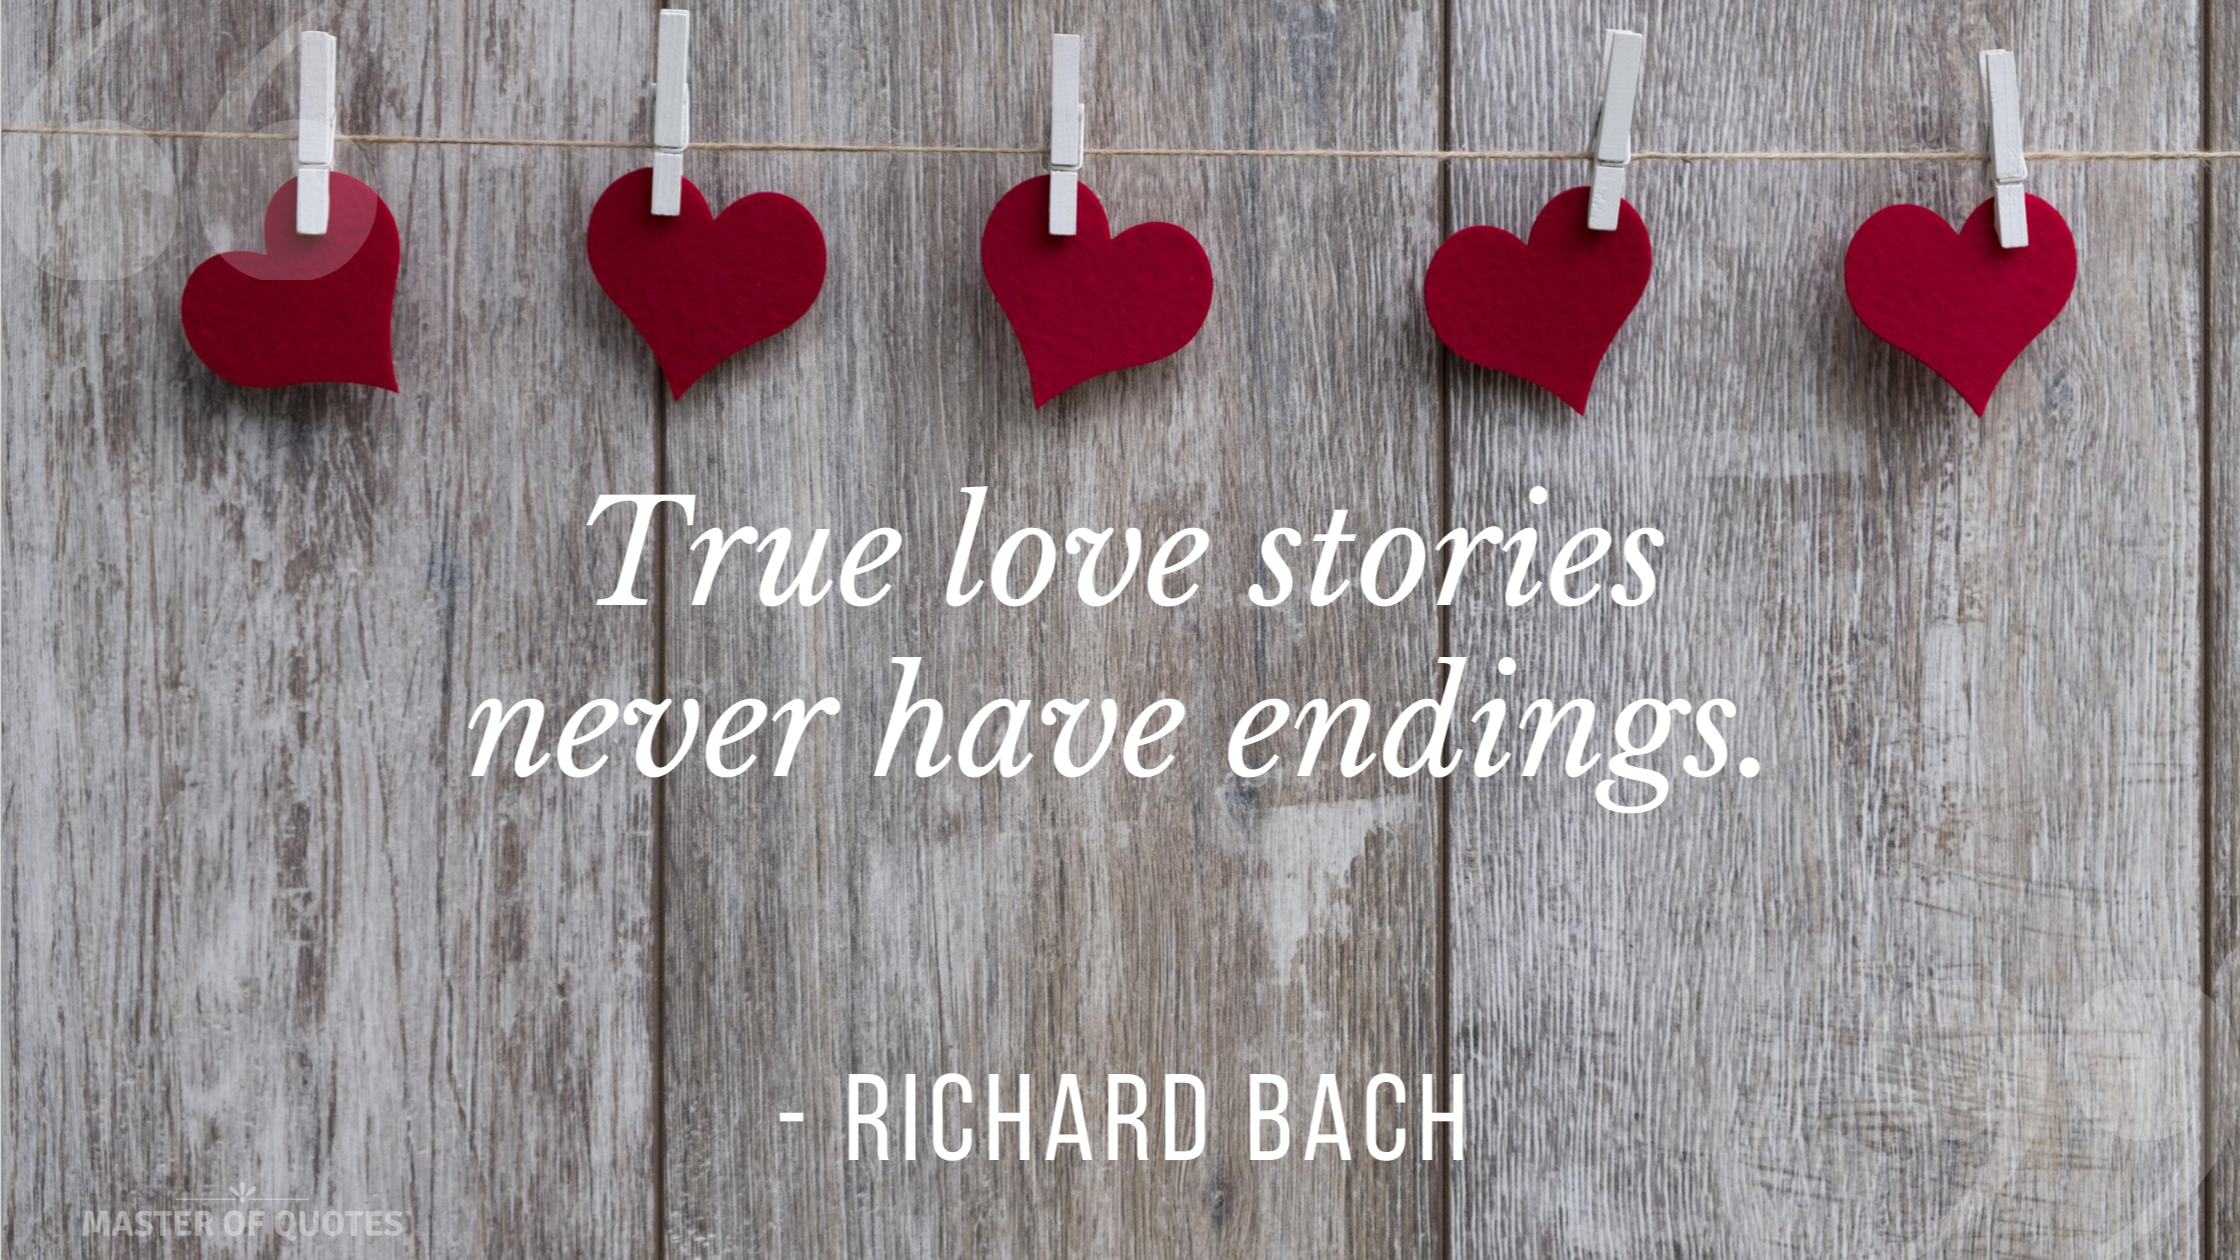 Richard Bach Quote